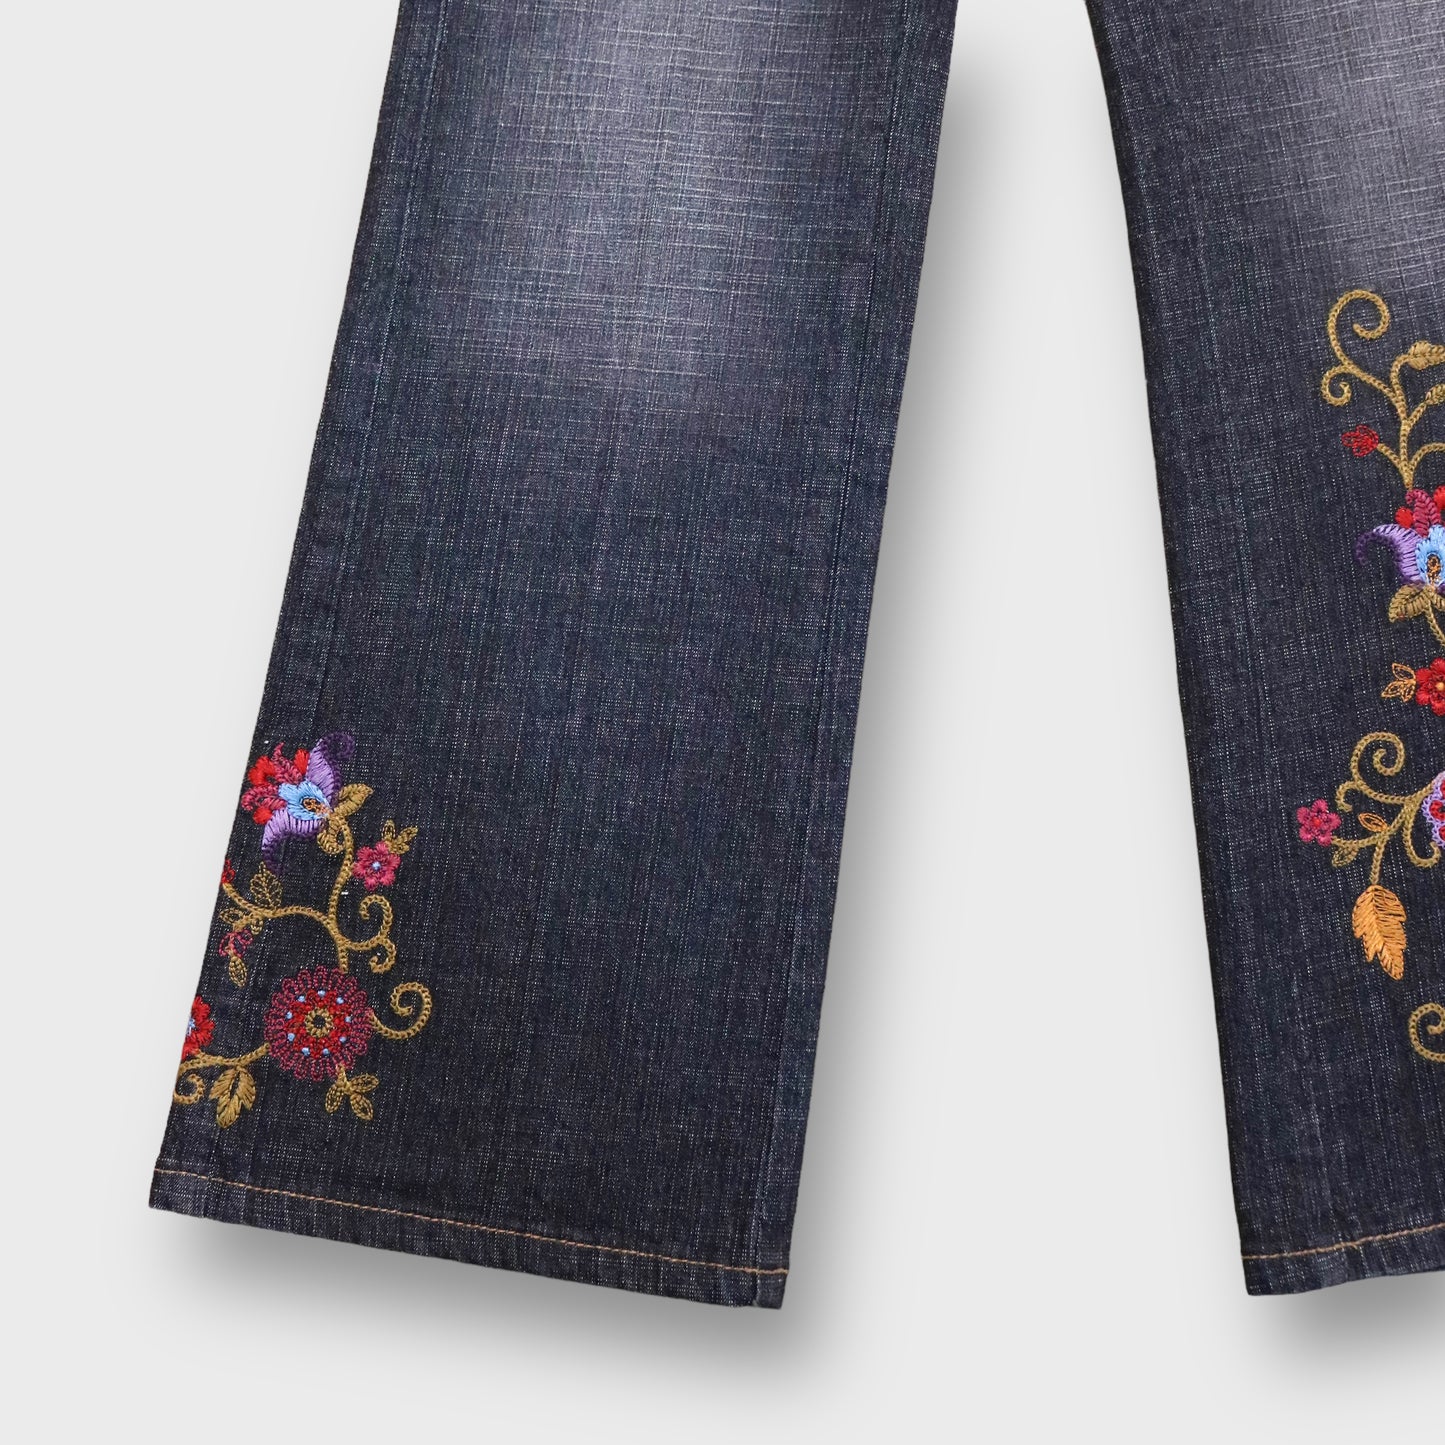 90's "Coldwater Creek" Flower embroidery black flare denim pants